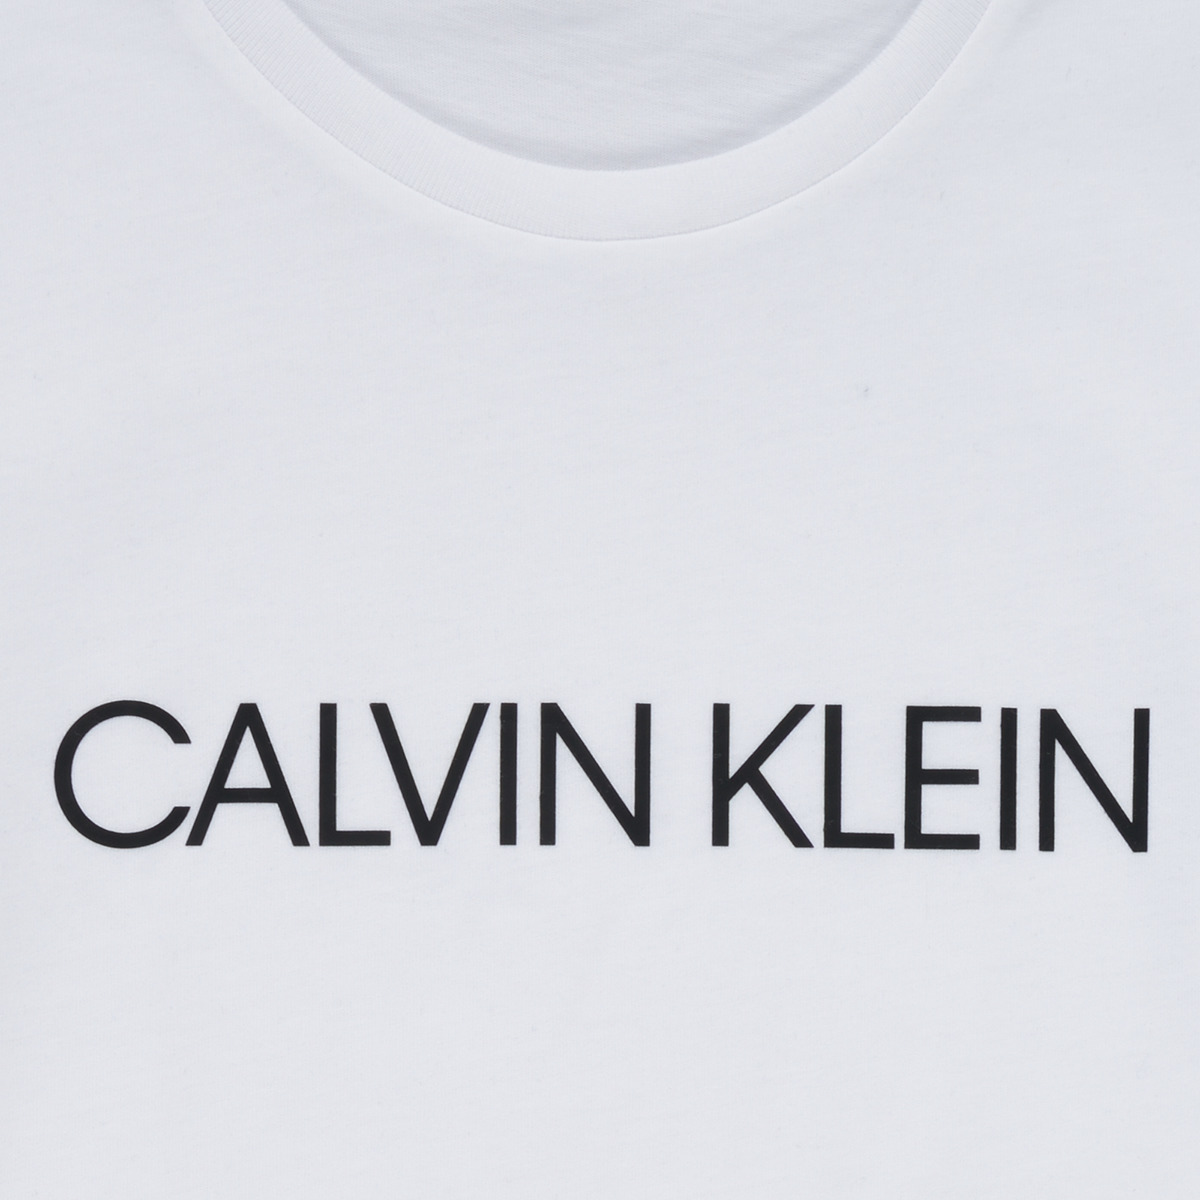 Calvin Klein Jeans Blanc INSTITUTIONAL T-SHIRT 9EiaxybO